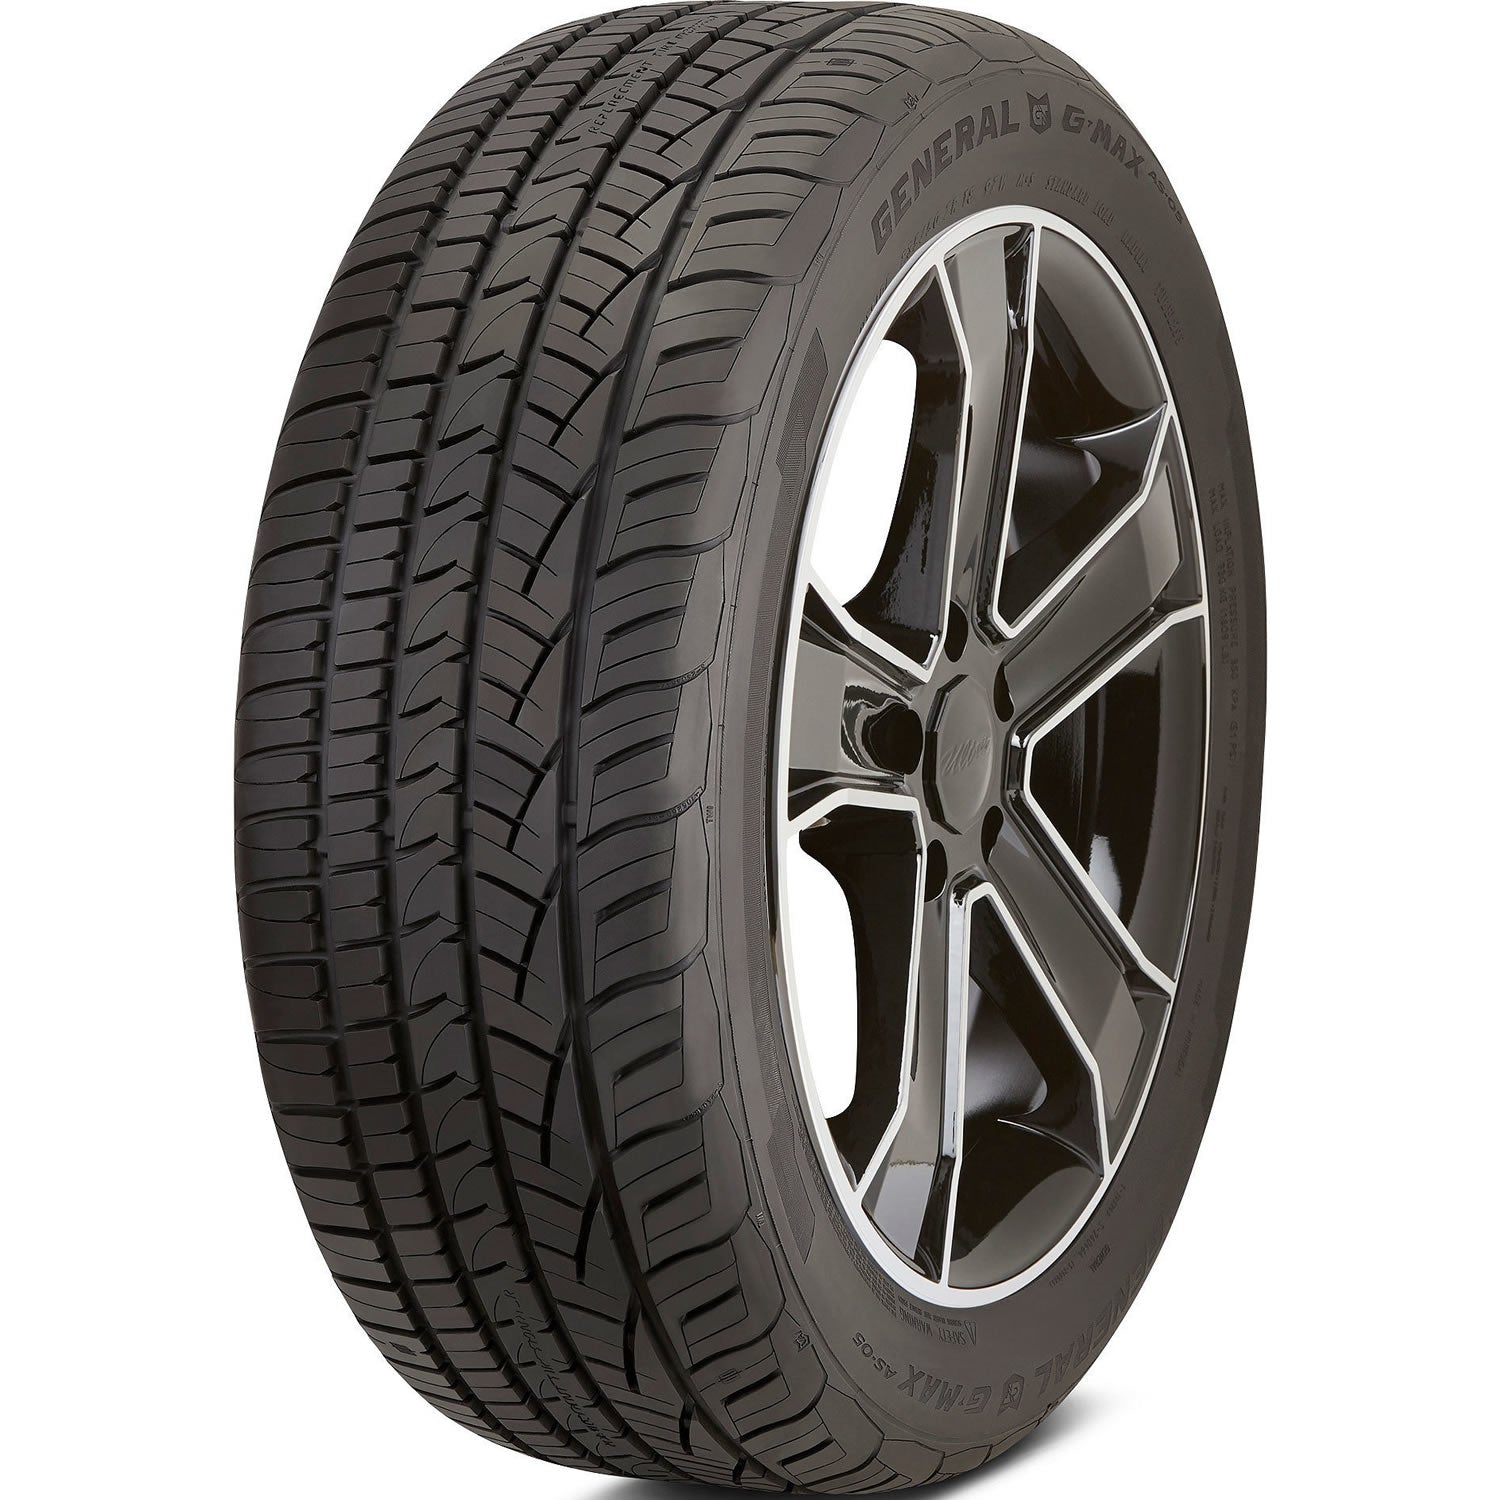 GENERAL G-MAX AS-05 245/40ZR18 (25.7X9.7R 18) Tires